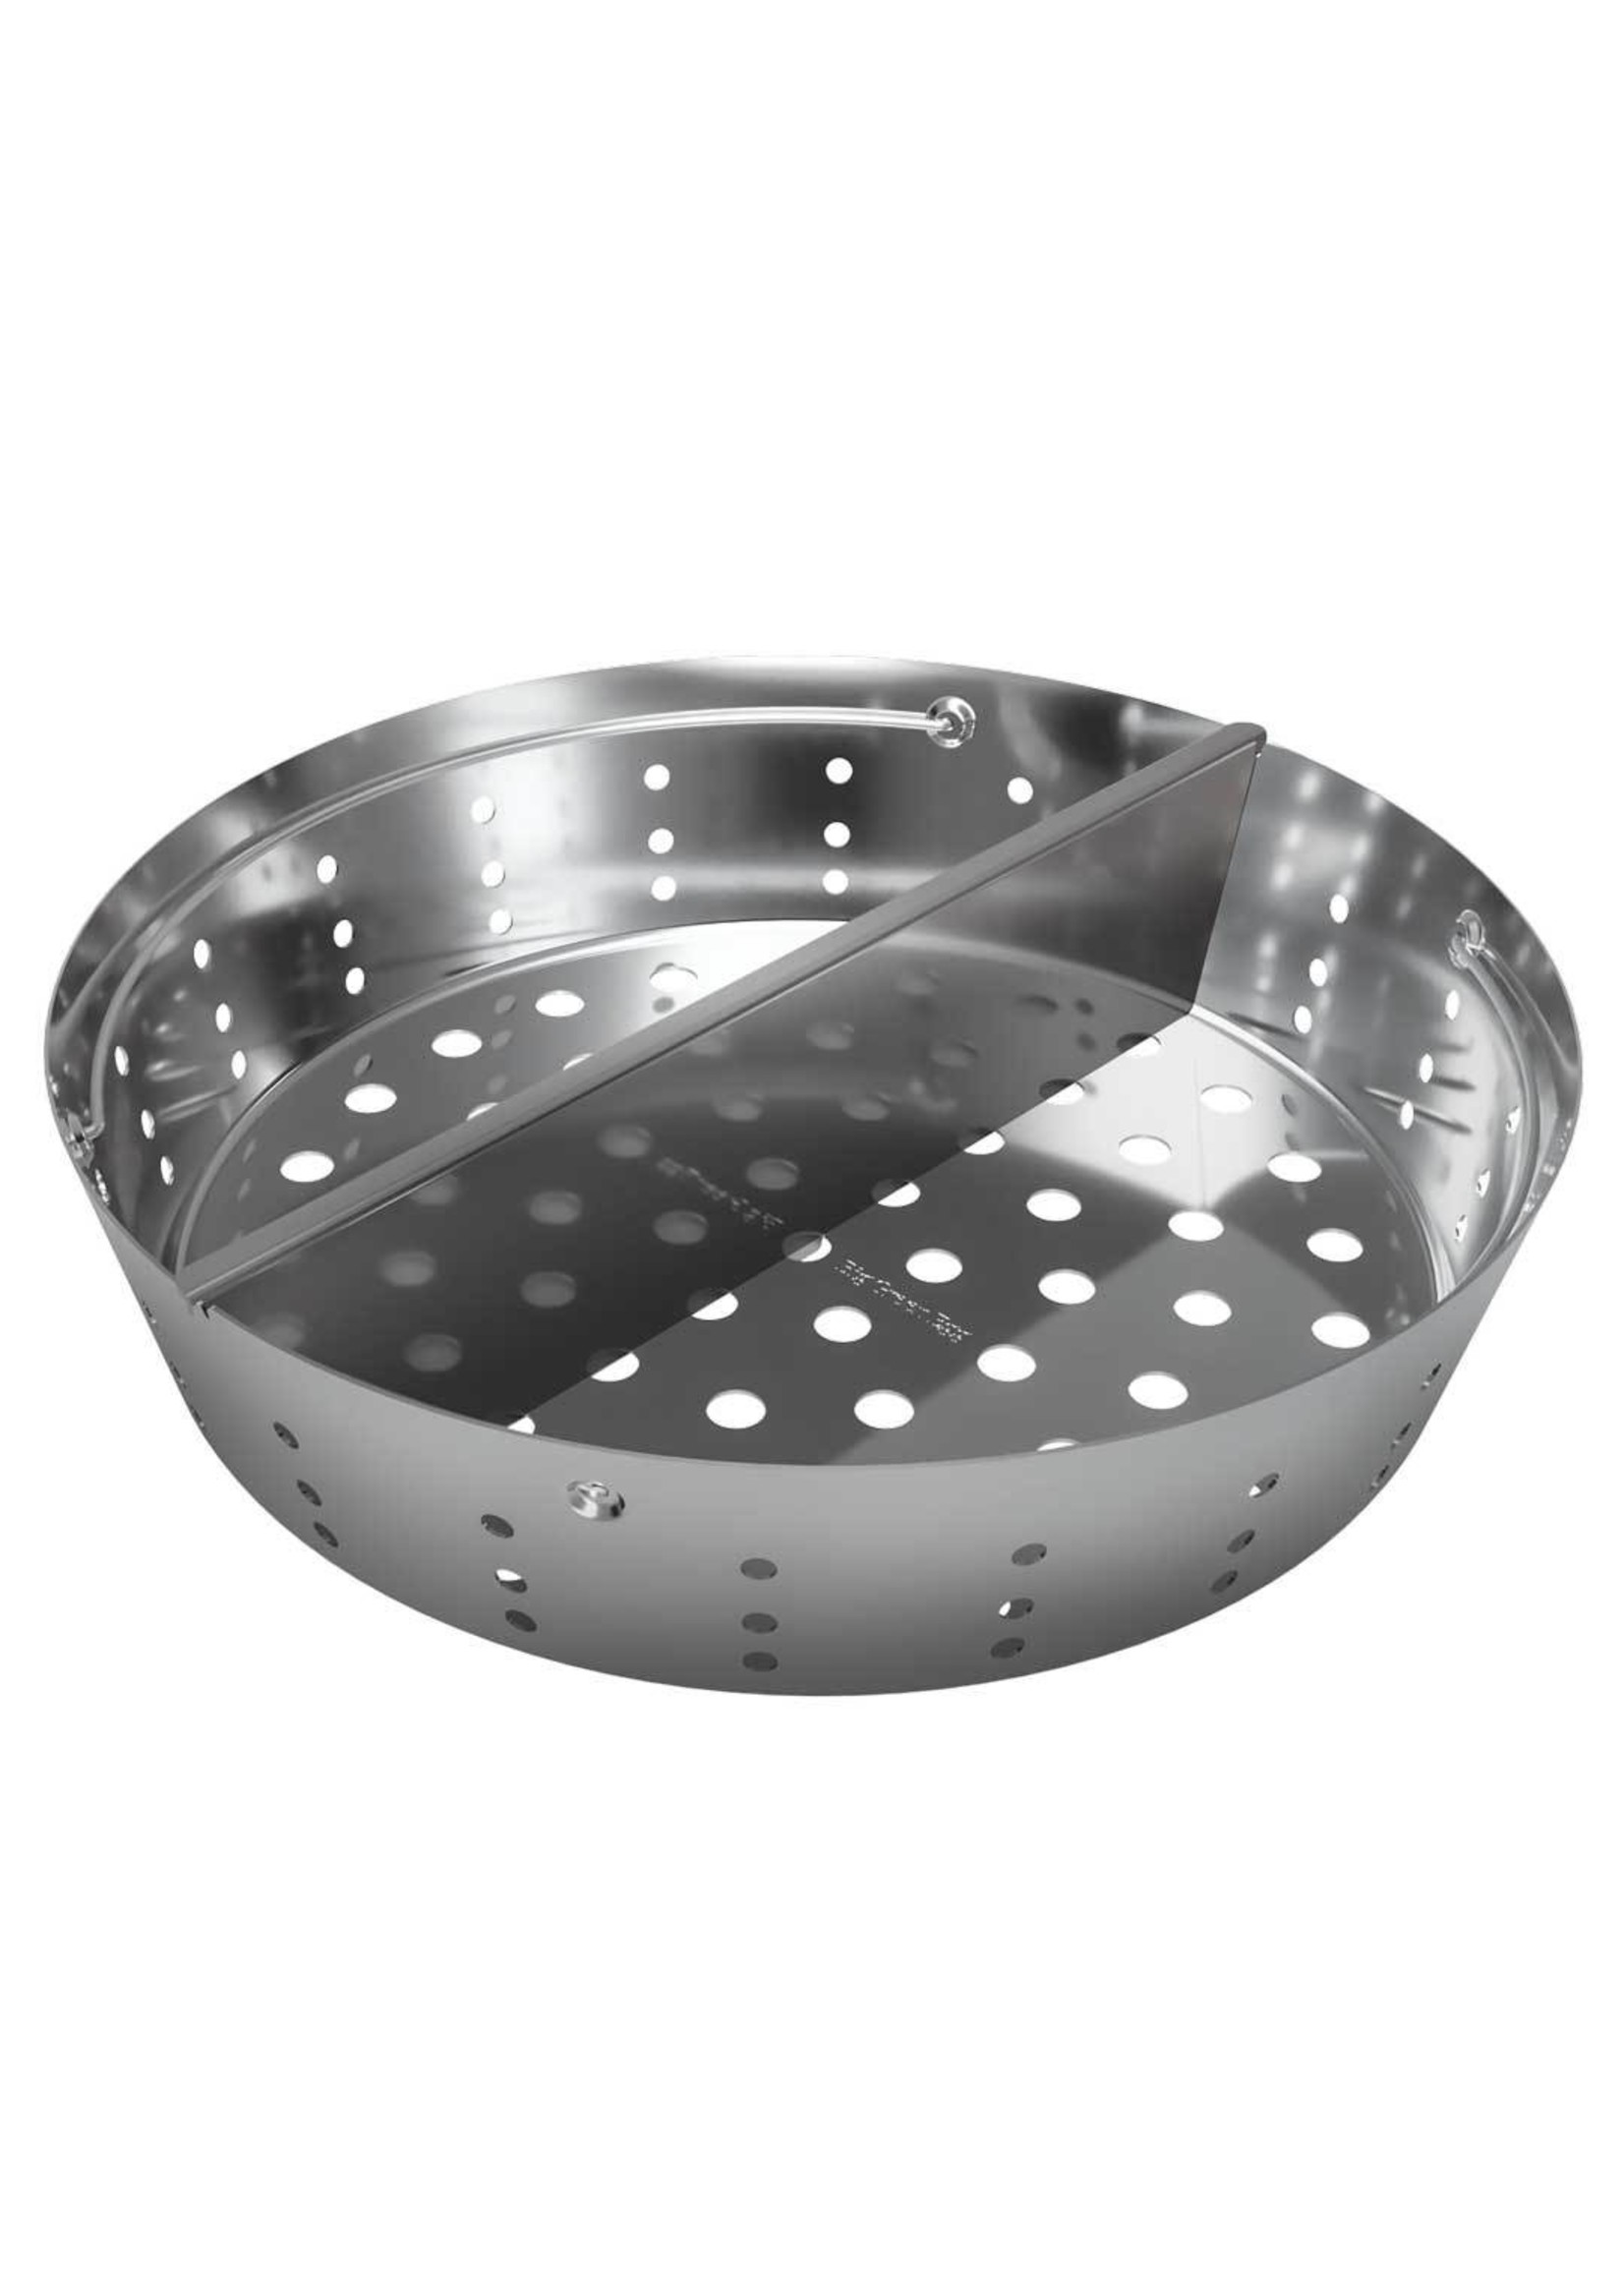 Big Green Egg BGE Stainless Steel Fire Bowl - XL